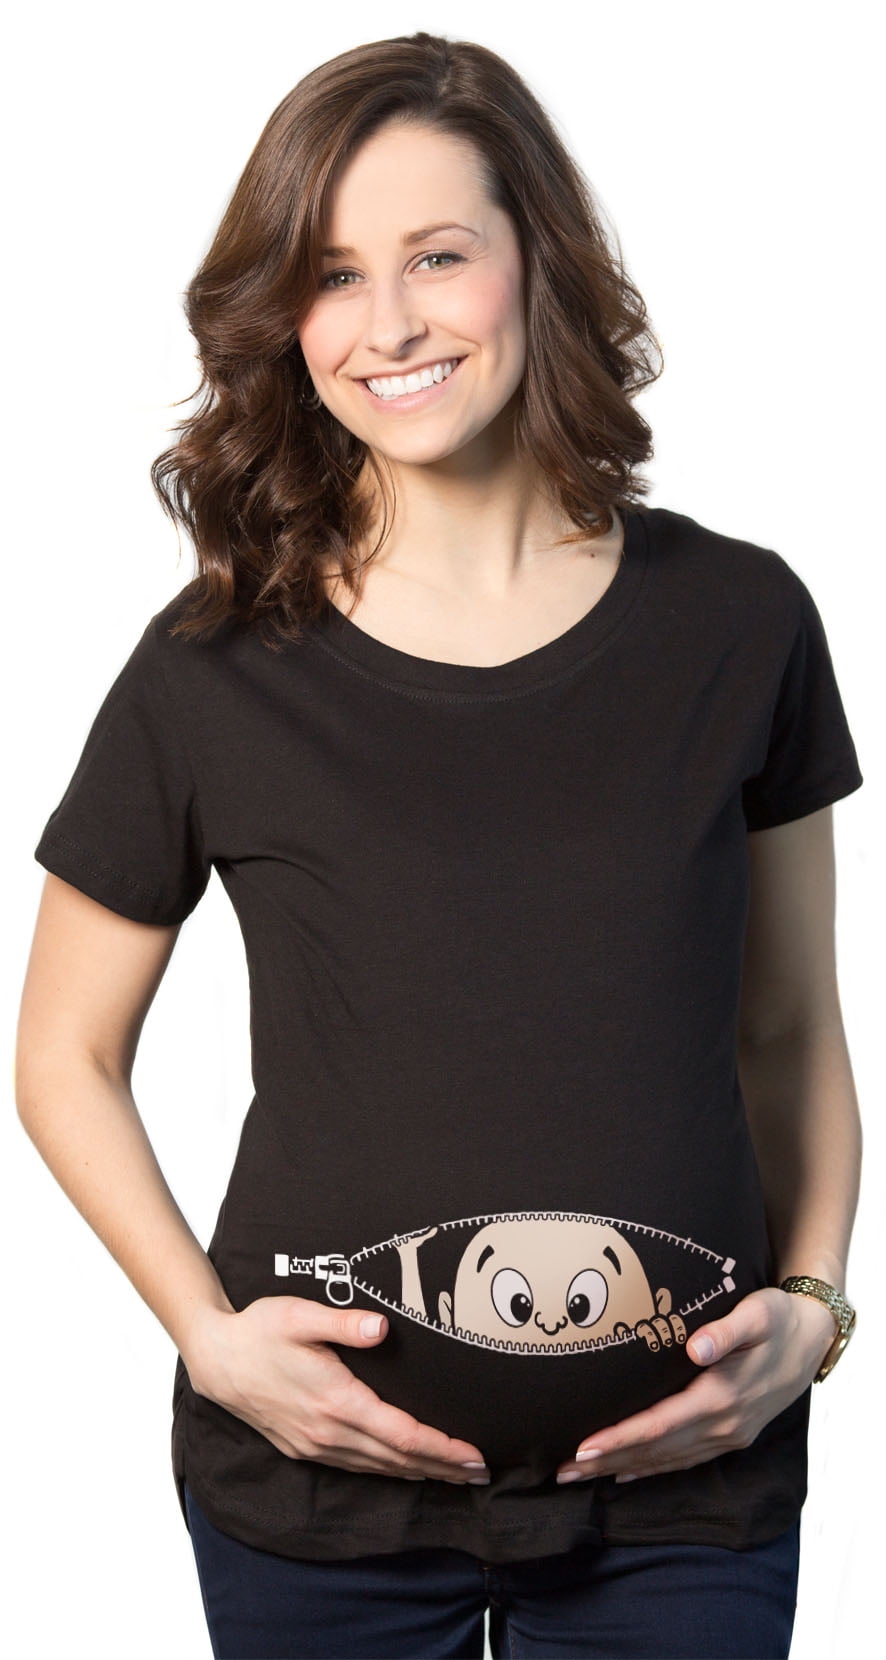 Maternity Baby Peeking T Shirt Funny Pregnancy Tee for Expecting Mothers 